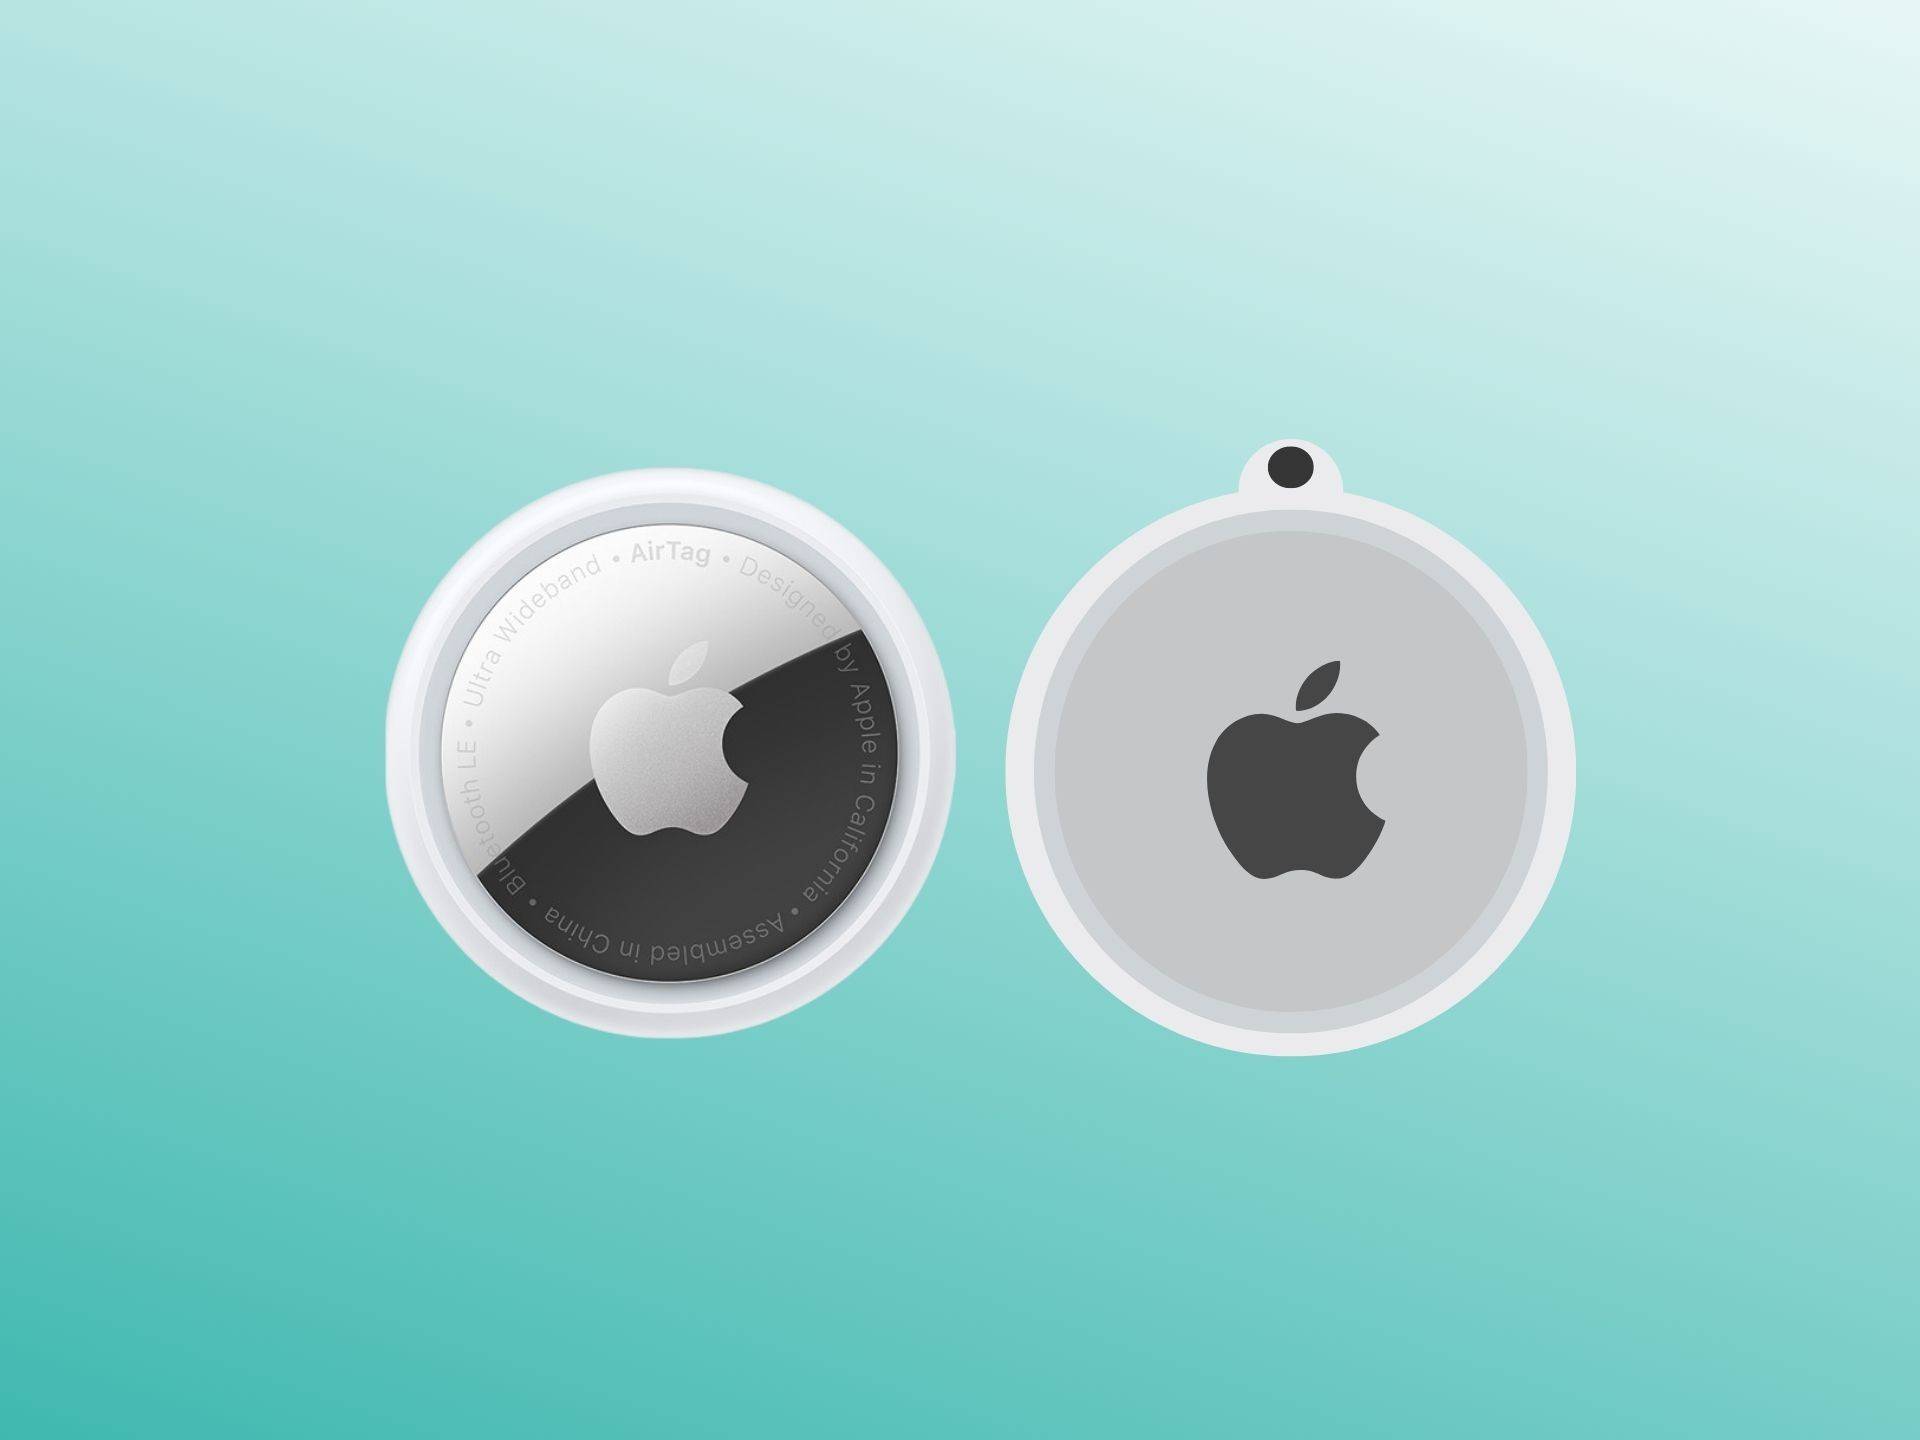 Apple AirTag first and second generation concept